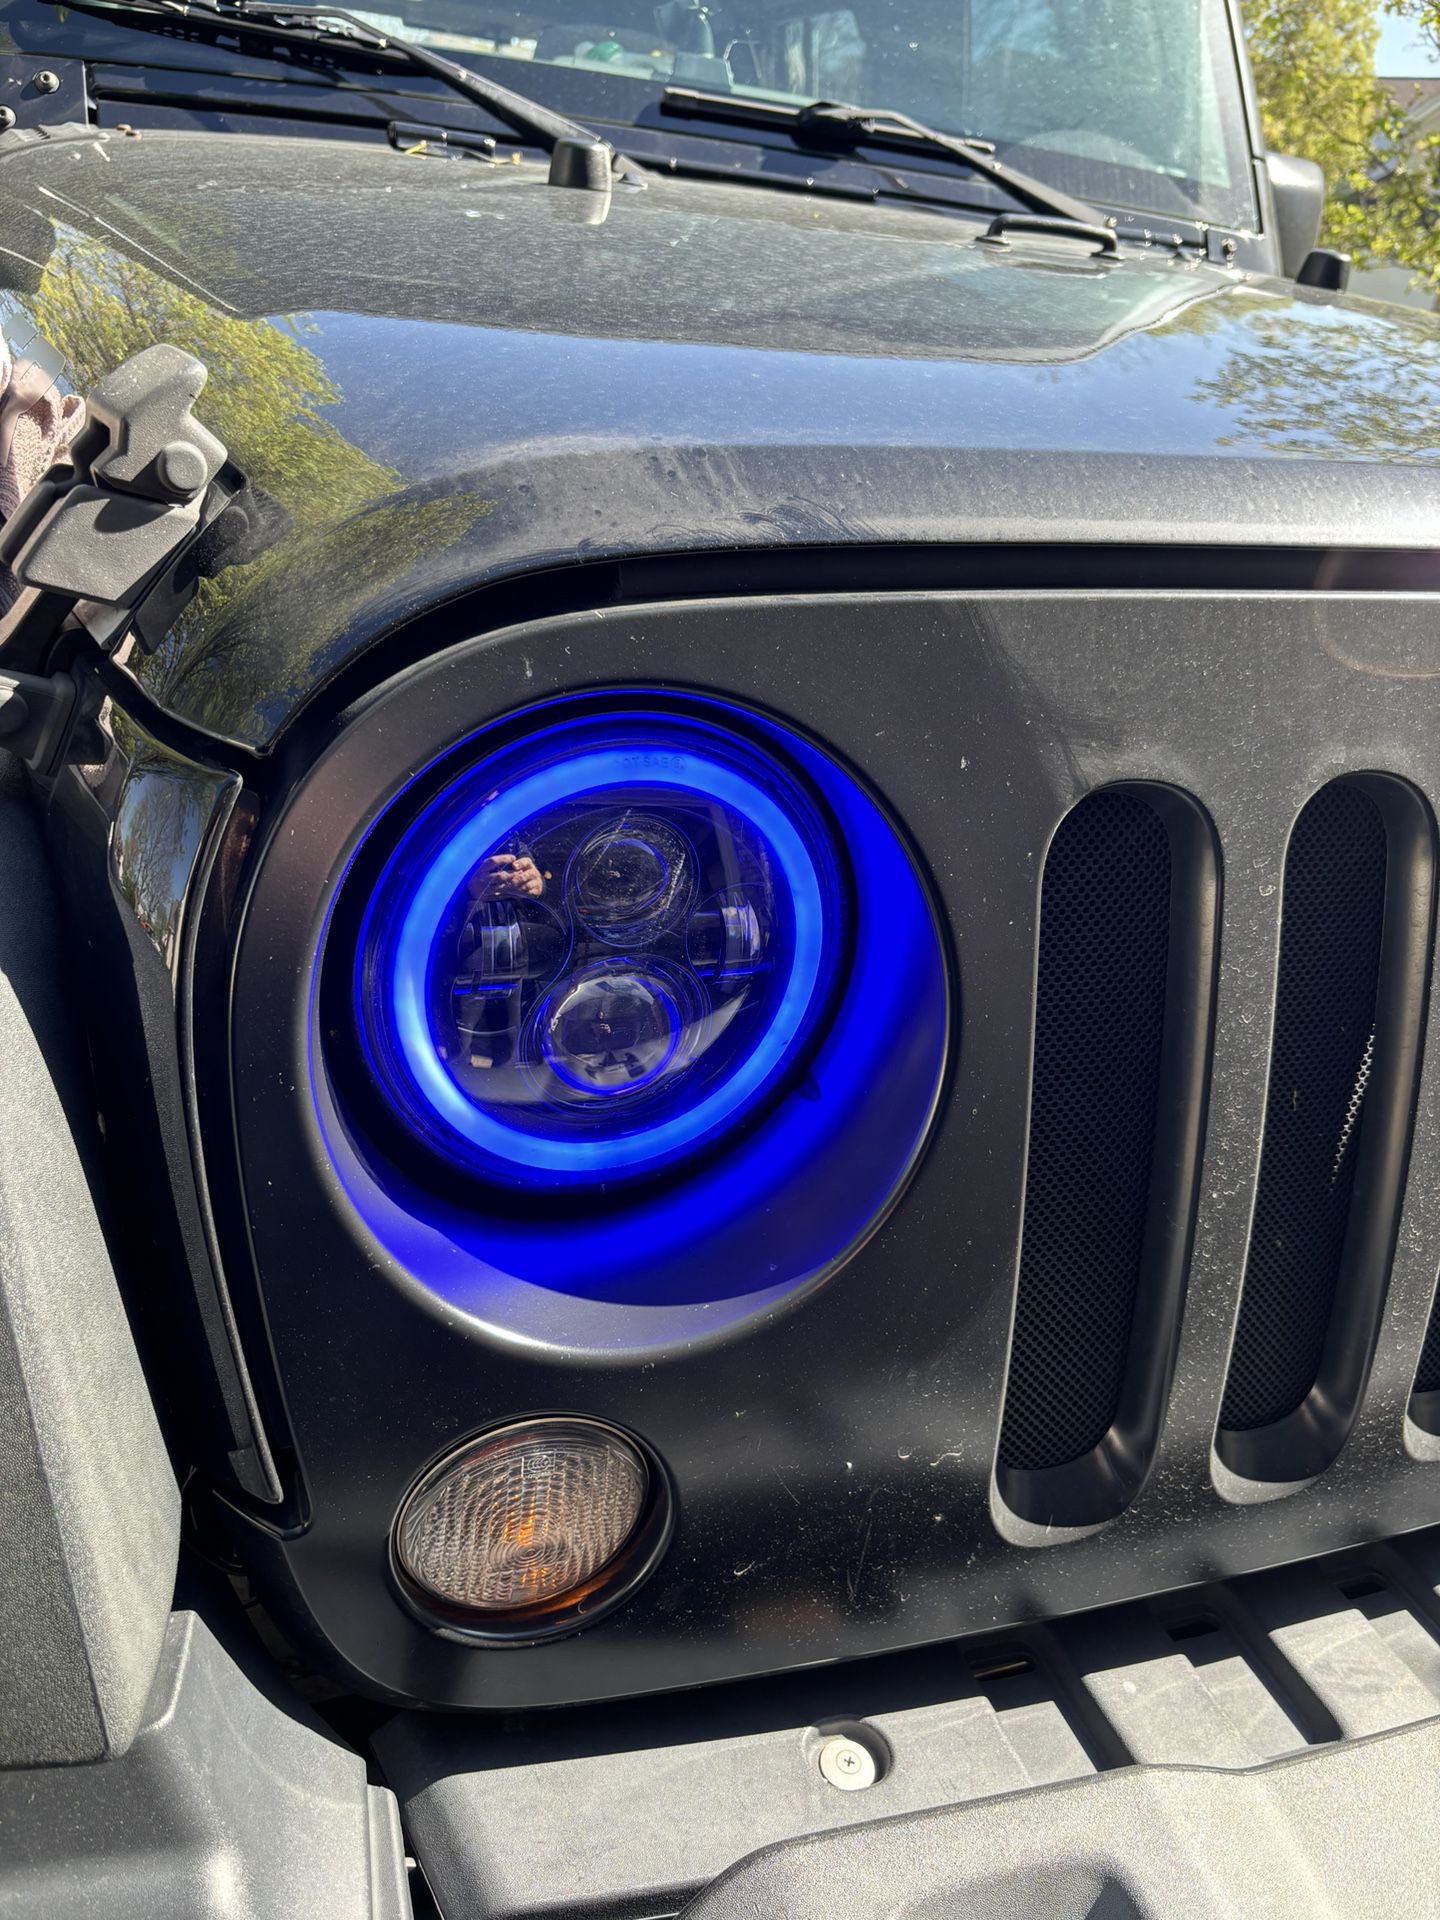 7 Inch Blue Halo Headlight For Jeep / Motorcycle.